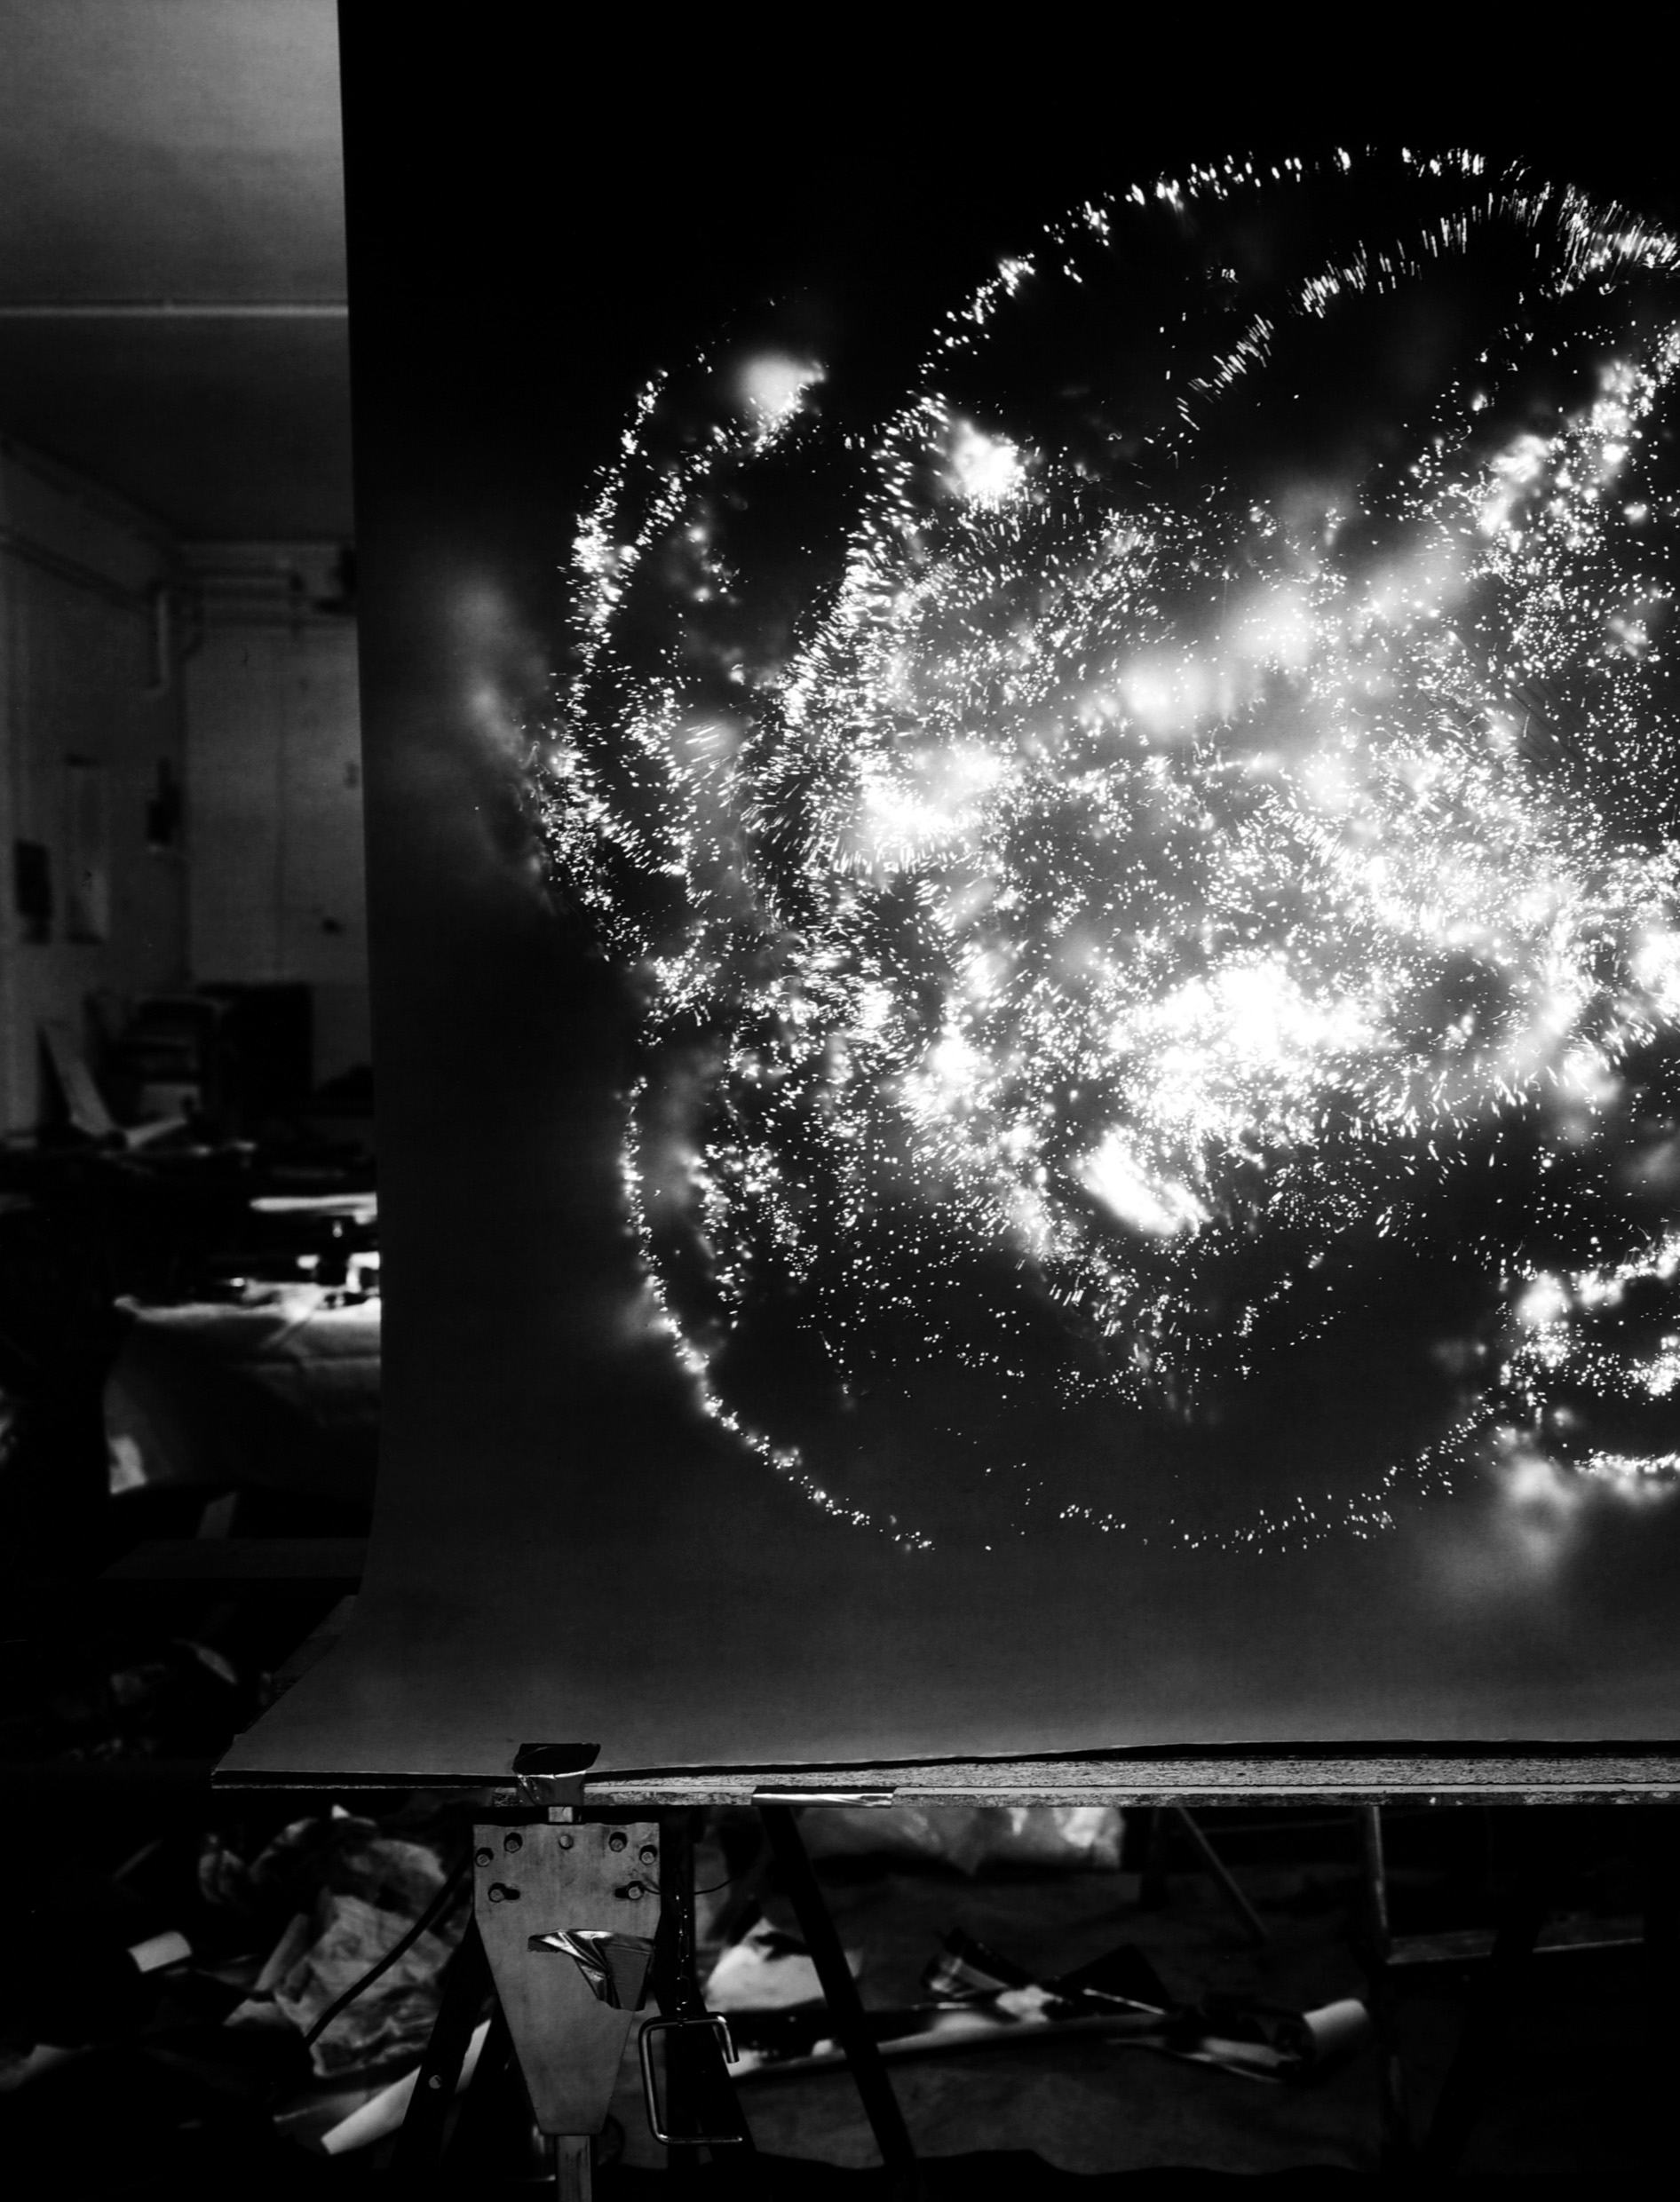 Studio Universe 1 (Diptych), from the series Light of Other Days, 2011 © Taiyo Onorato & Nico Krebs, courtesy of the Foam Collection